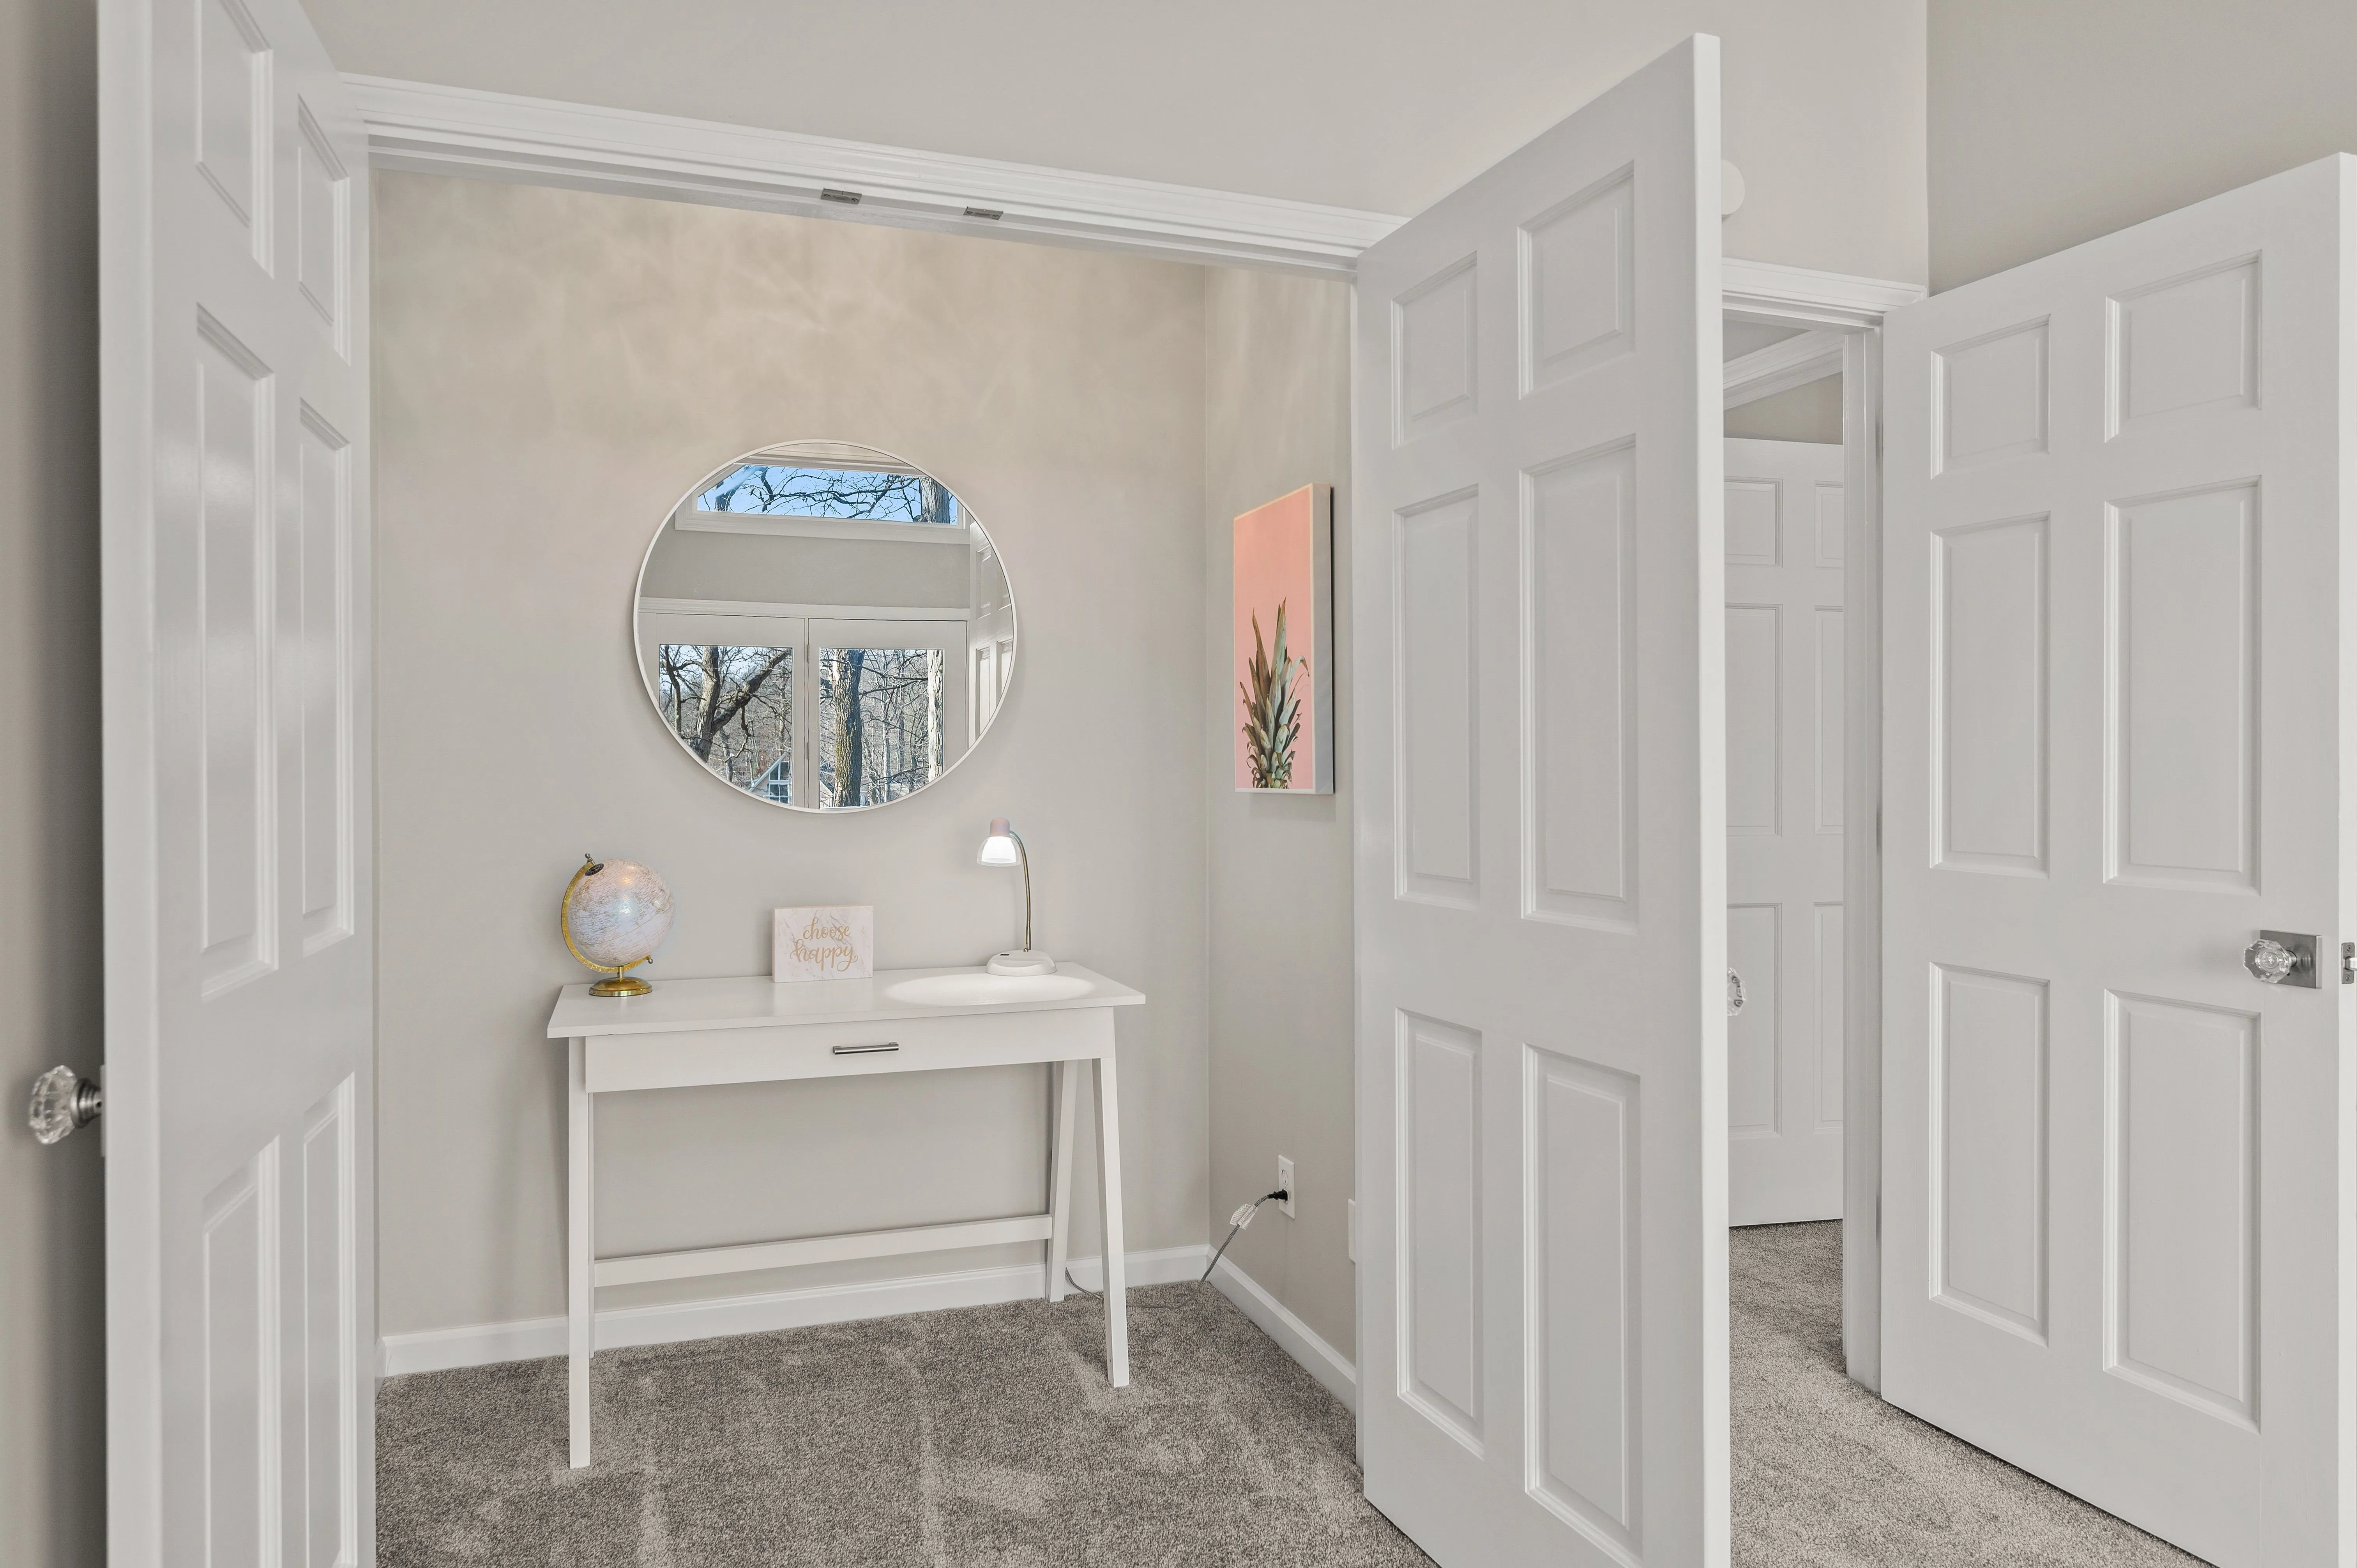 Brightly lit bathroom interior with an open door, featuring a white vanity with a round mirror, wall sconces, and decorative items on the countertop.